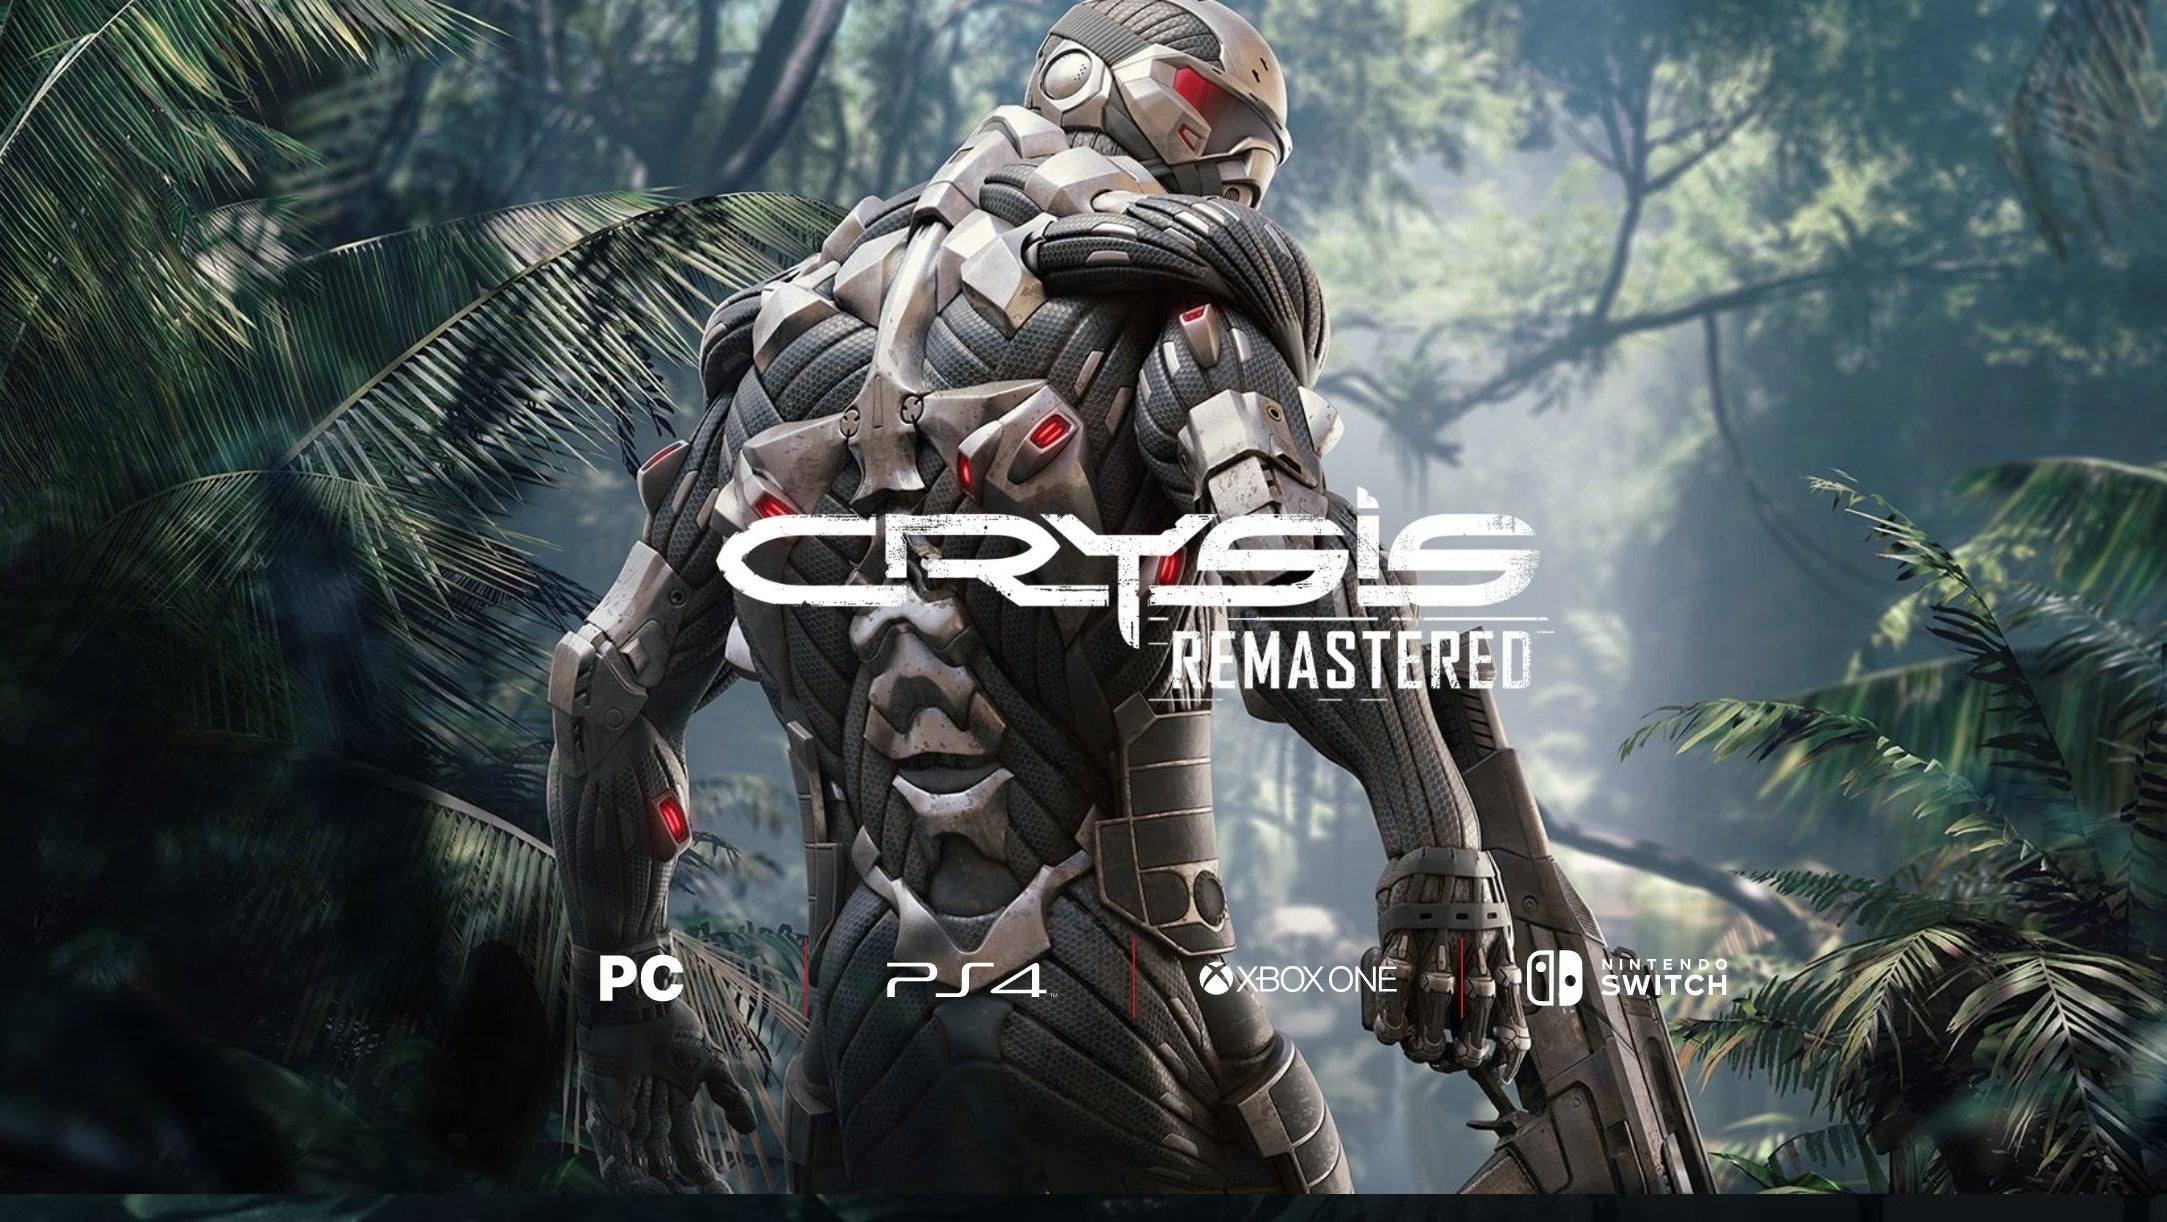 Image for Crysis Remastered revealed, coming to Nintendo Switch